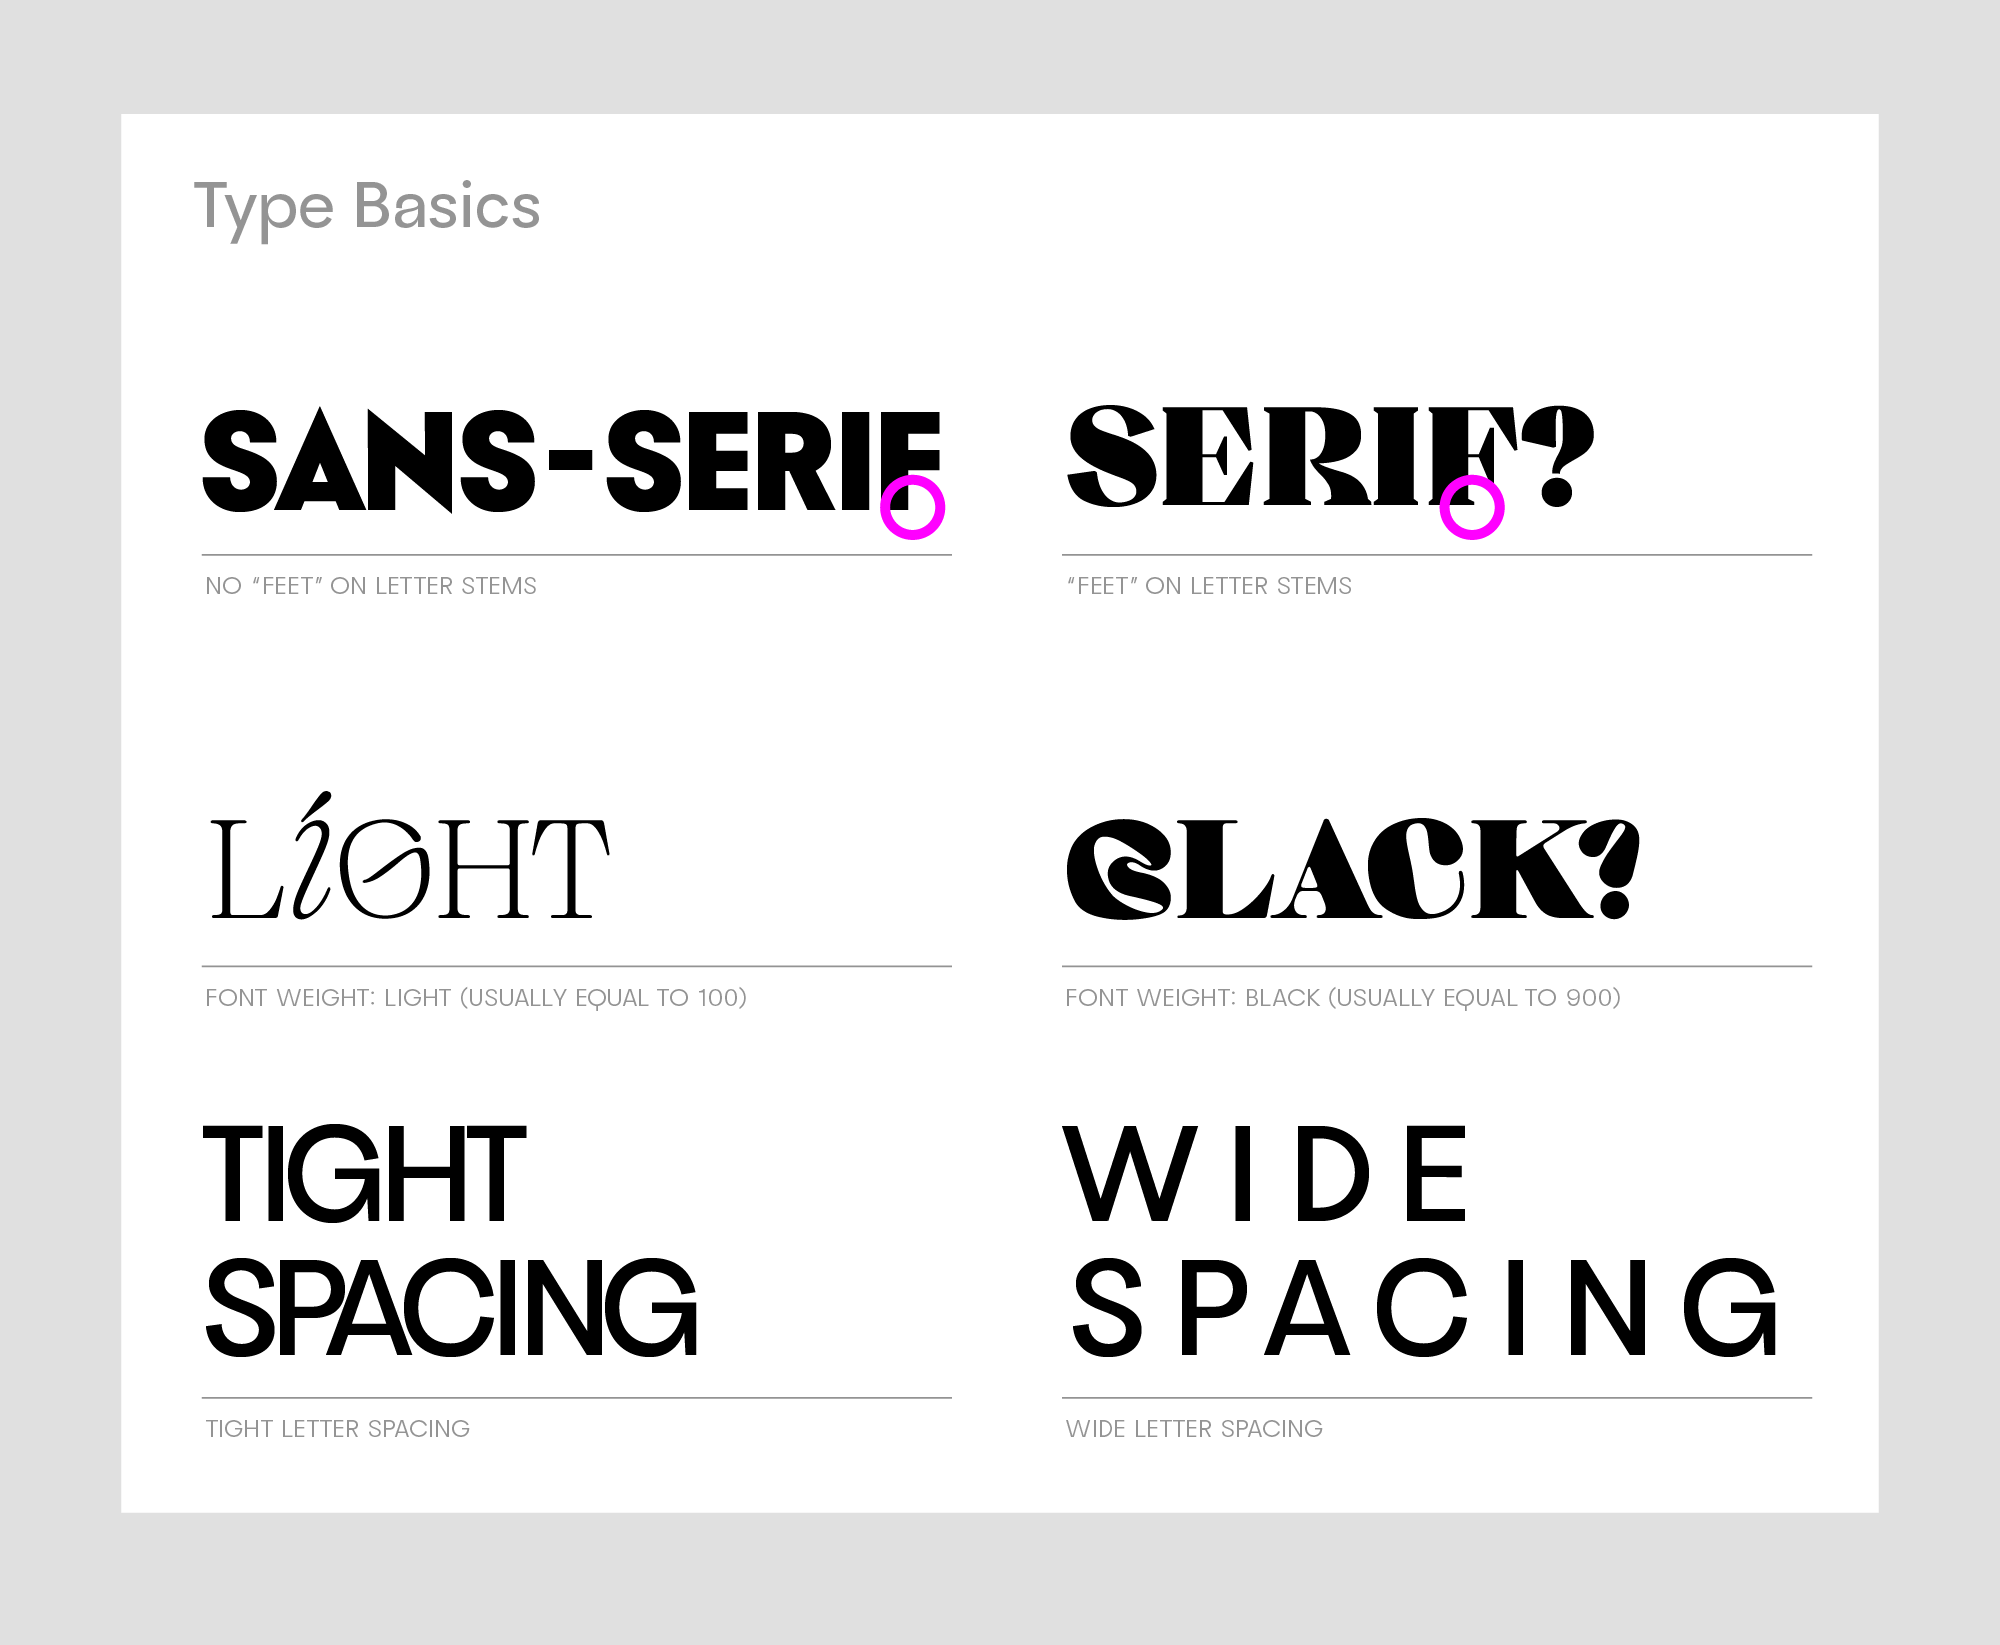 type basics of typography: sans-serif or serif, light or black weight, letter spacing